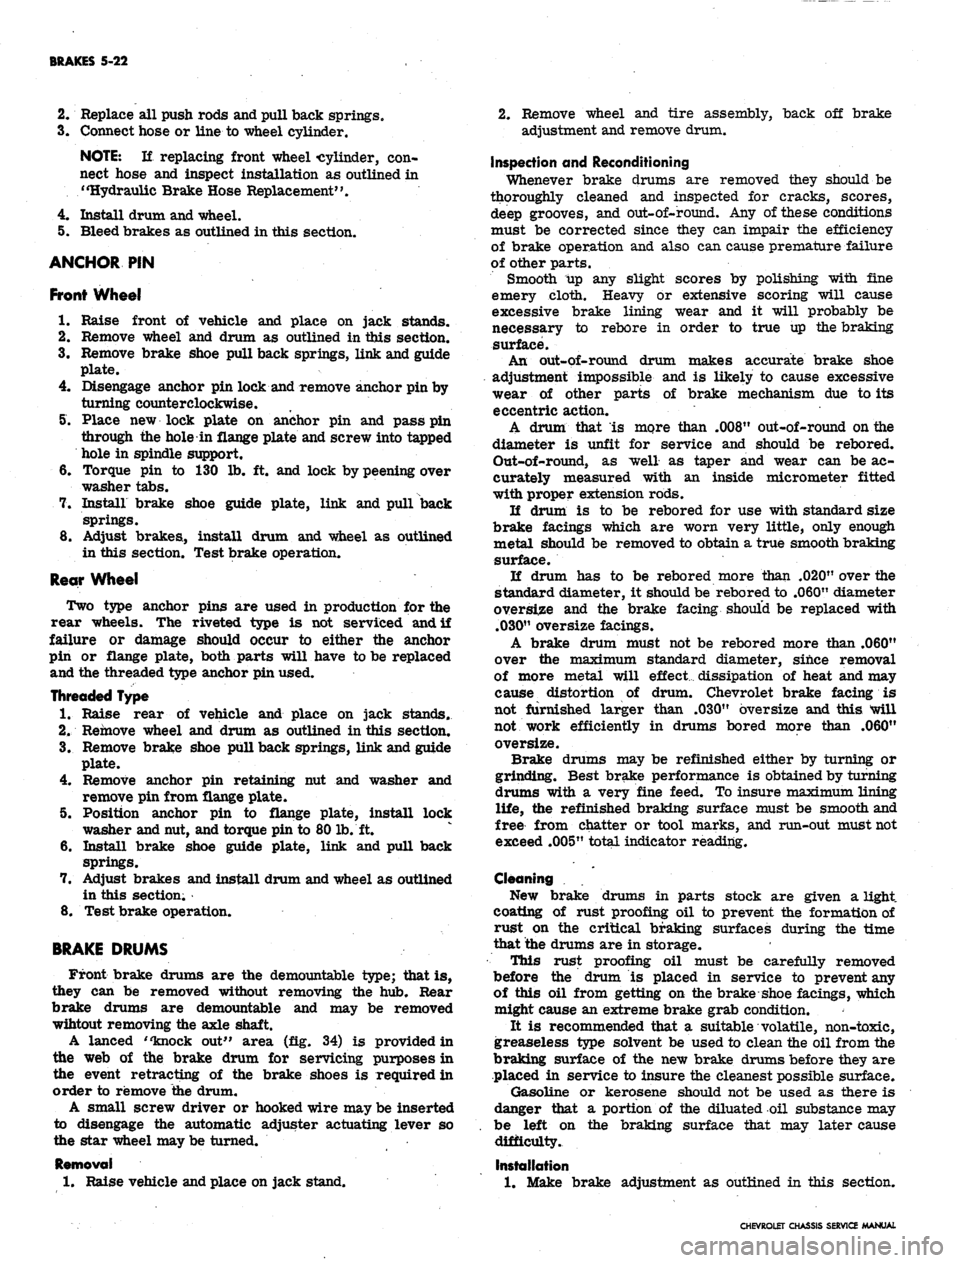 CHEVROLET CAMARO 1967 1.G Chassis Workshop Manual 
BRAKES 5-22

2.
 Replace ail push rods and pull back springs.

3.
 Connect hose or line to wheel cylinder.

NOTE:
 If replacing front wheel cylinder, con-

nect hose and inspect installation as outli